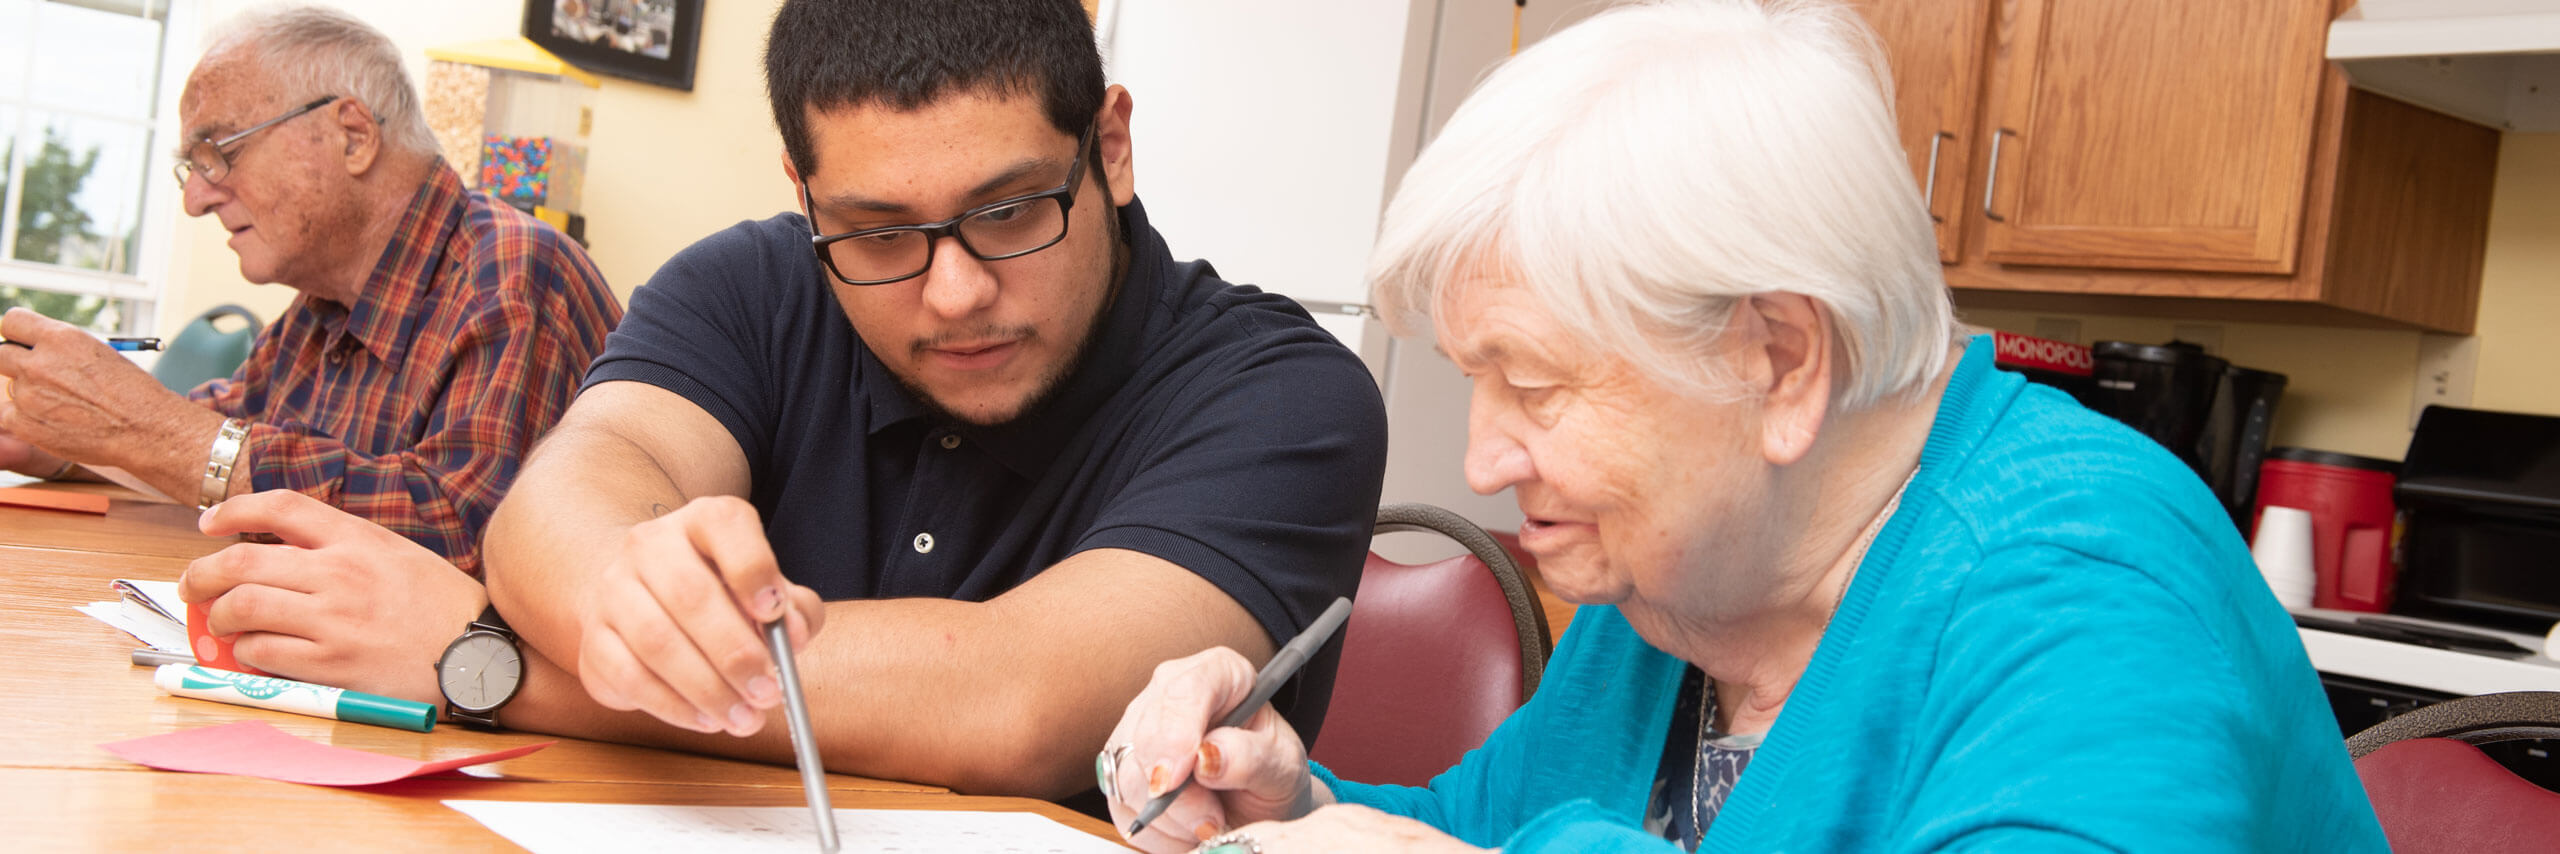 Student helps an elderly woman with paperwork.